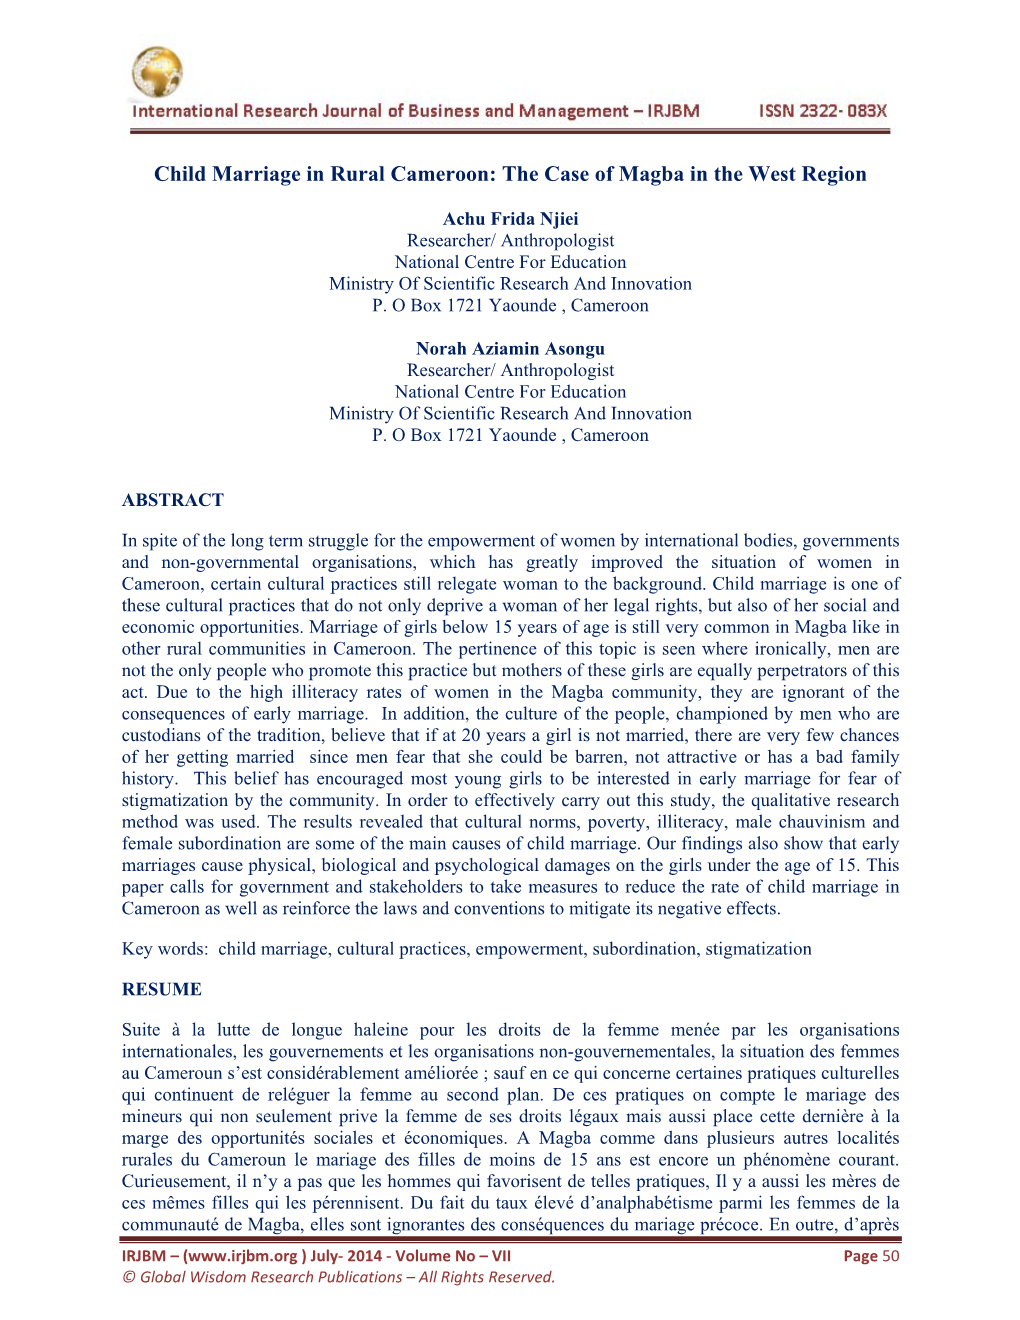 Child Marriage in Rural Cameroon: the Case of Magba in the West Region